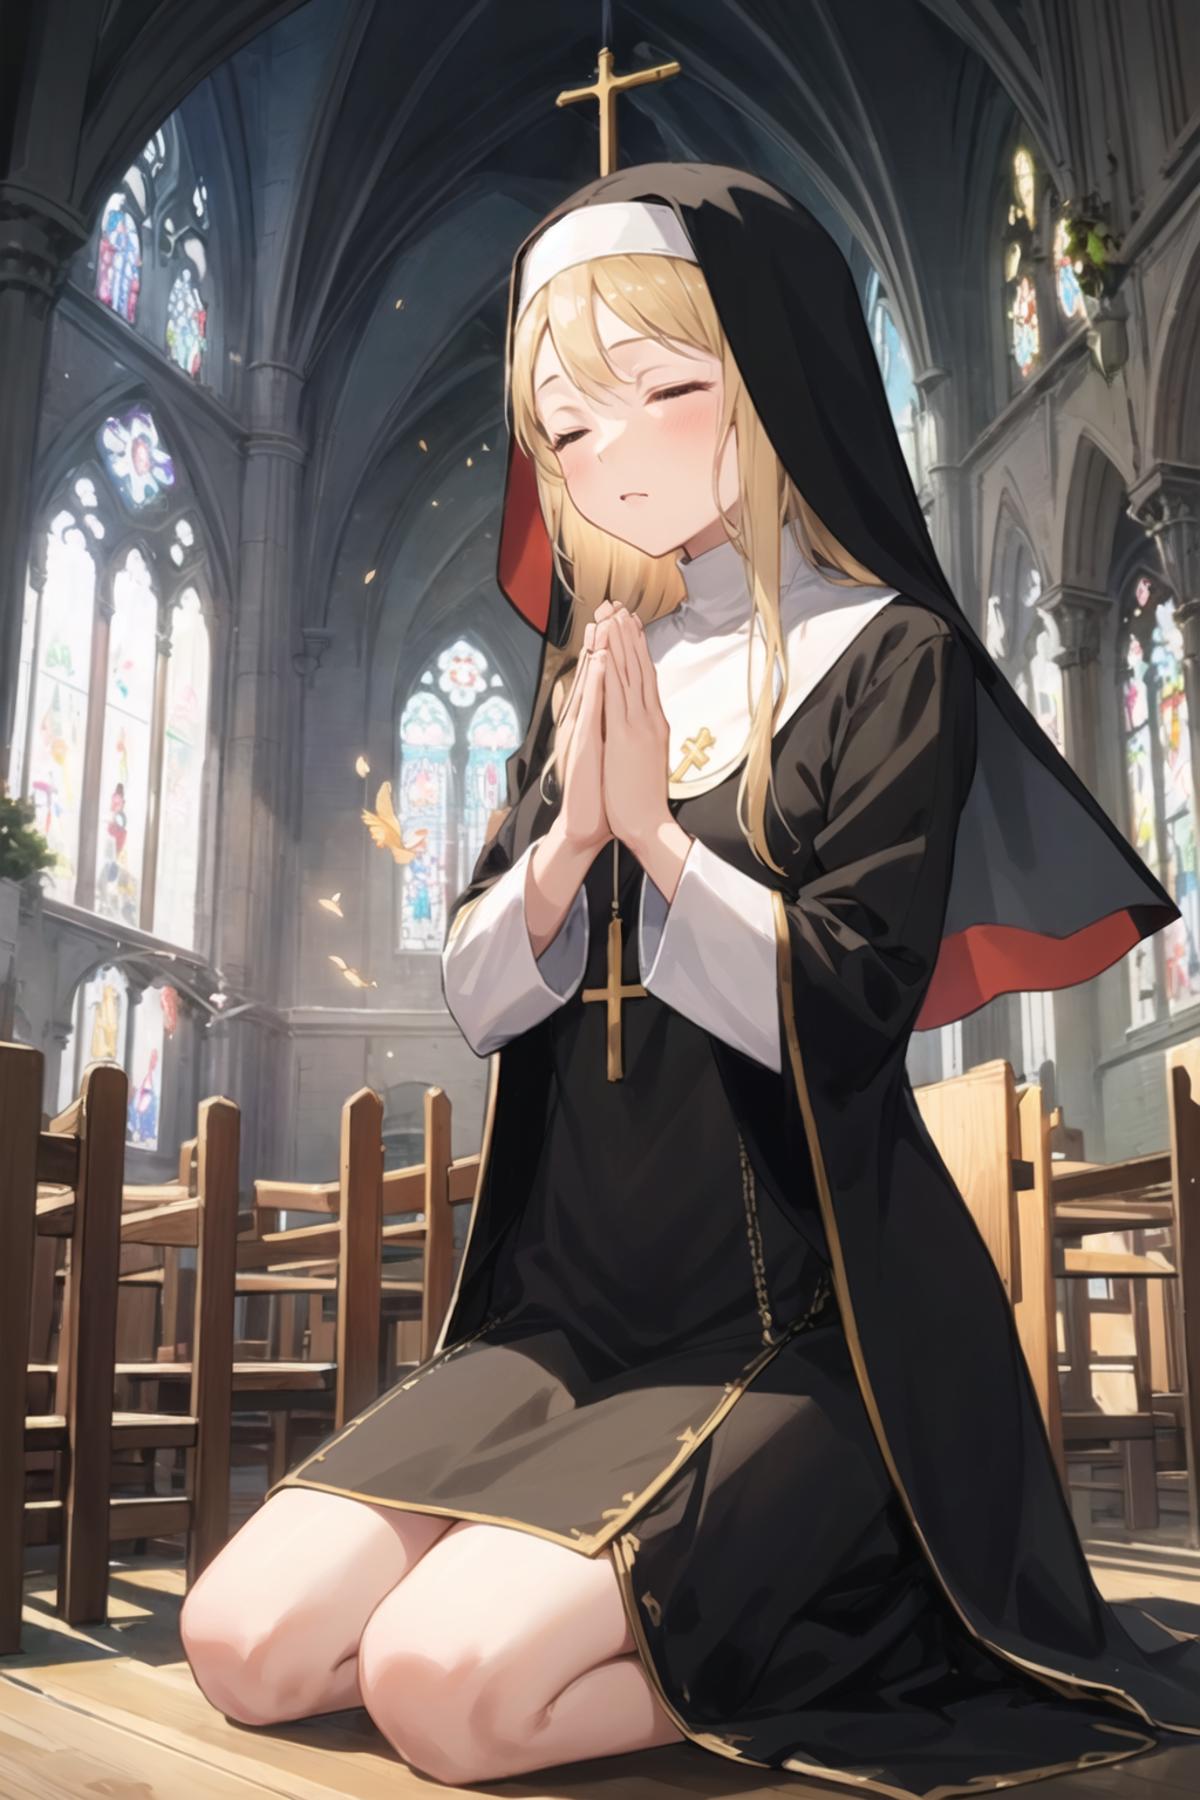 [OpenPose] Praying image by BlazzzX4